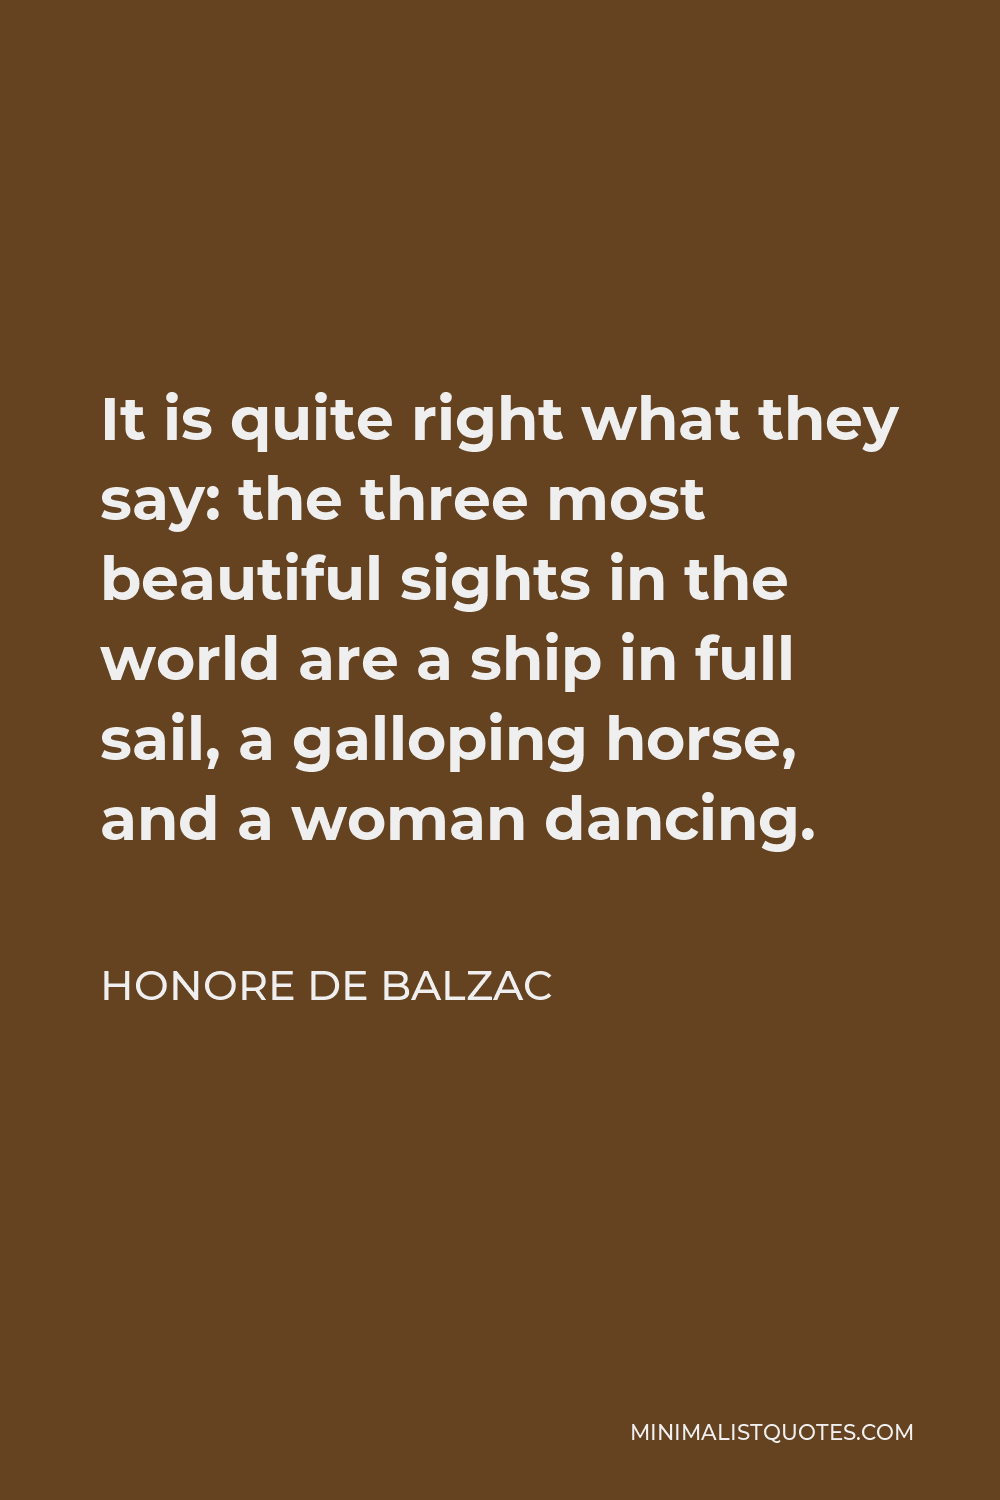 Honore de Balzac Quote - It is quite right what they say: the three most beautiful sights in the world are a ship in full sail, a galloping horse, and a woman dancing.